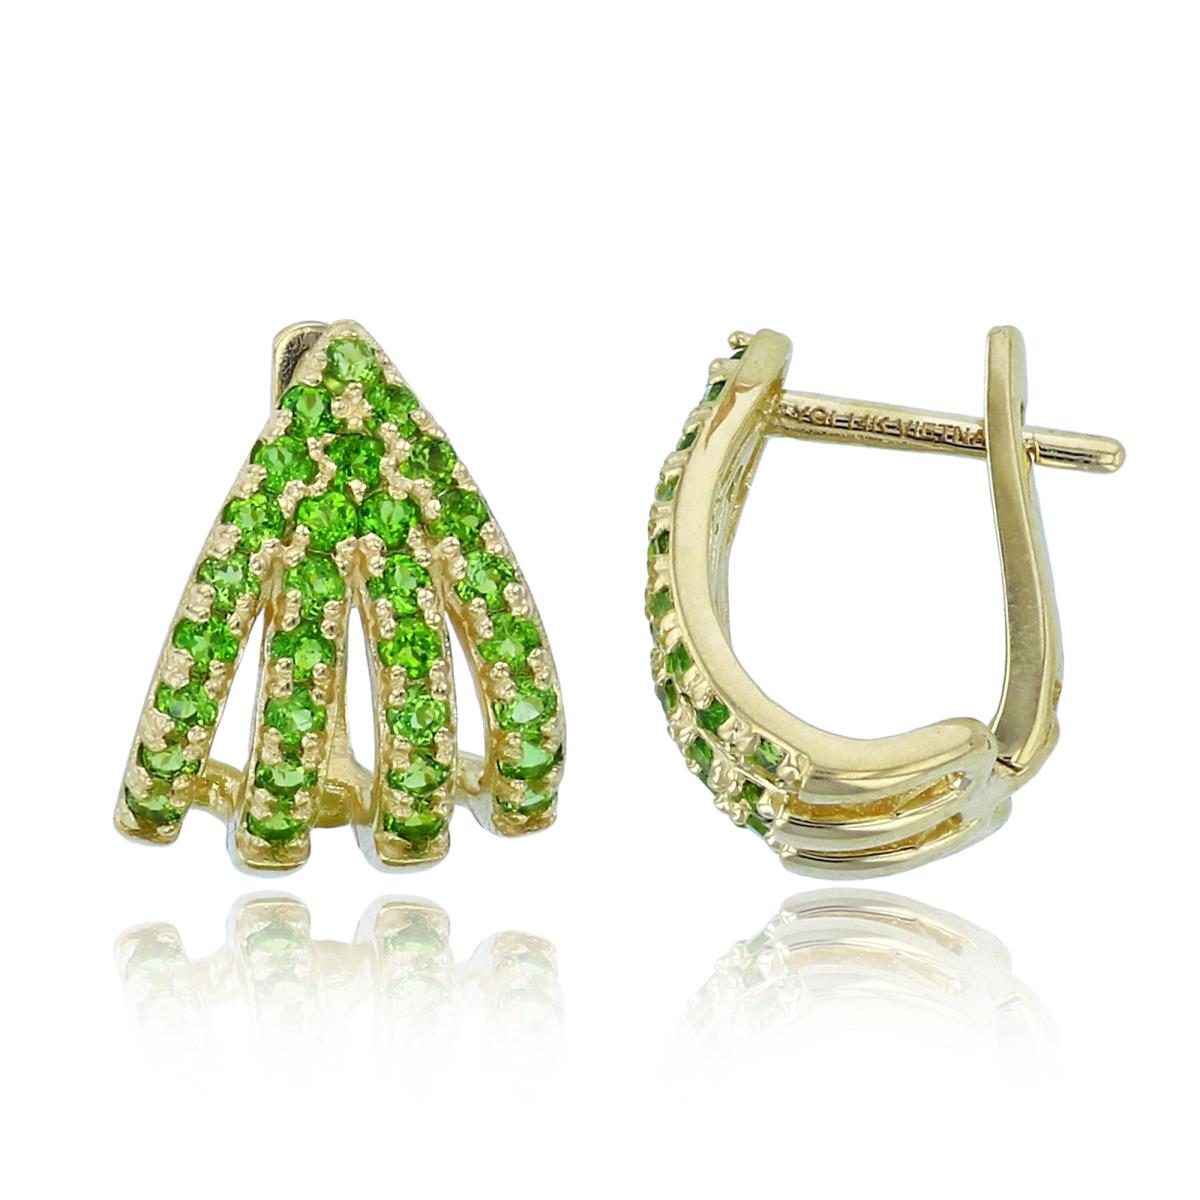 10K Yellow Gold Rnd Chrom Diopside Four Rows Huggie Earrings with Omega Backs